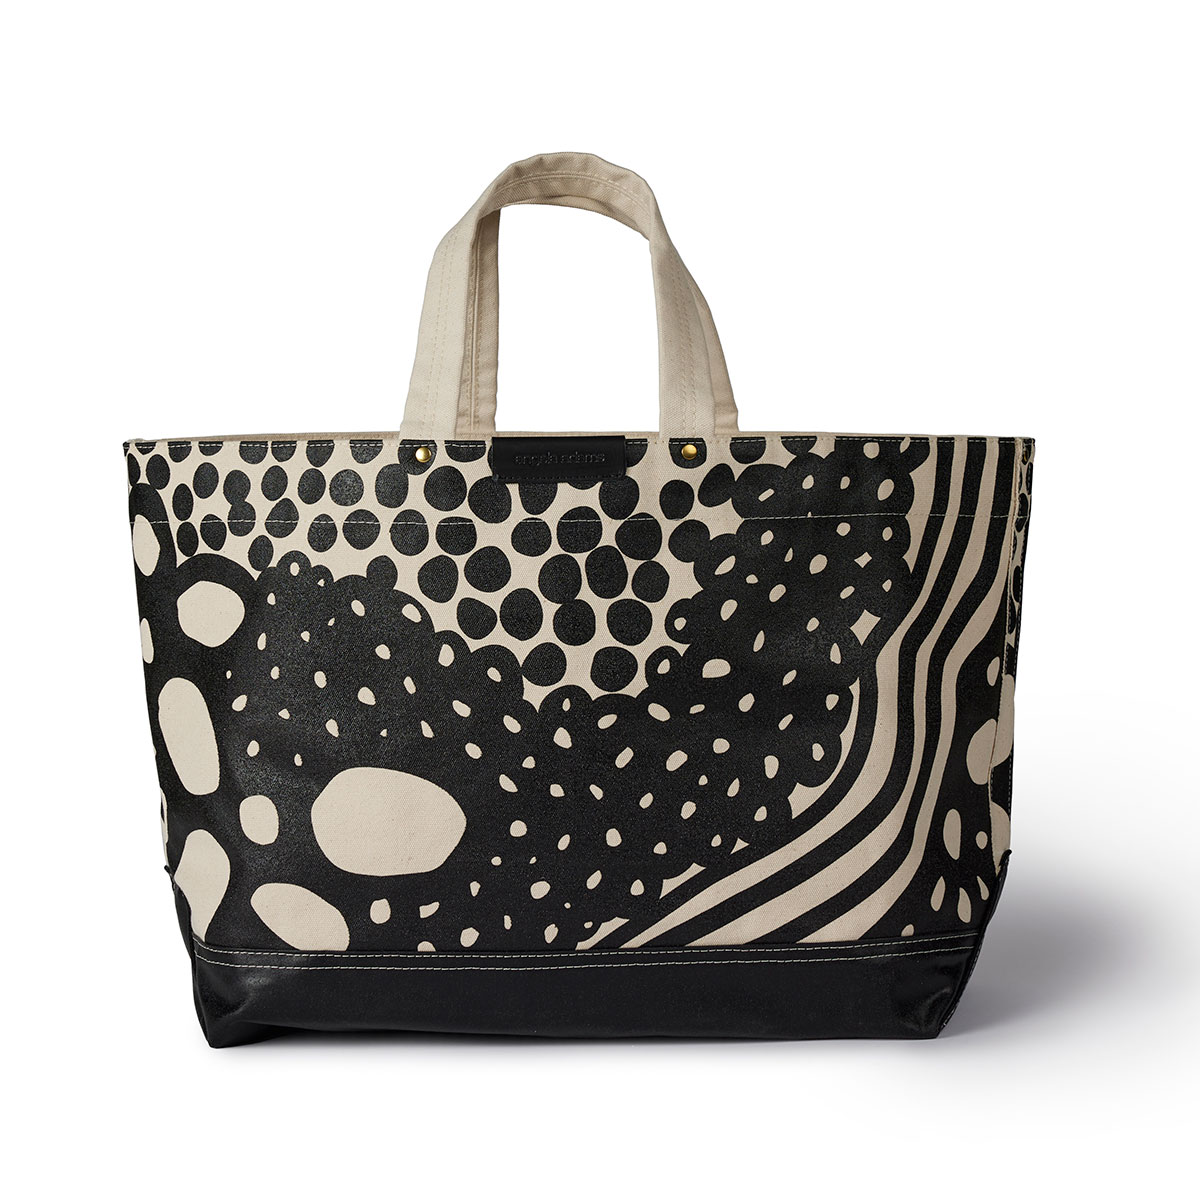 Black and tan colored tote by Angela Adams